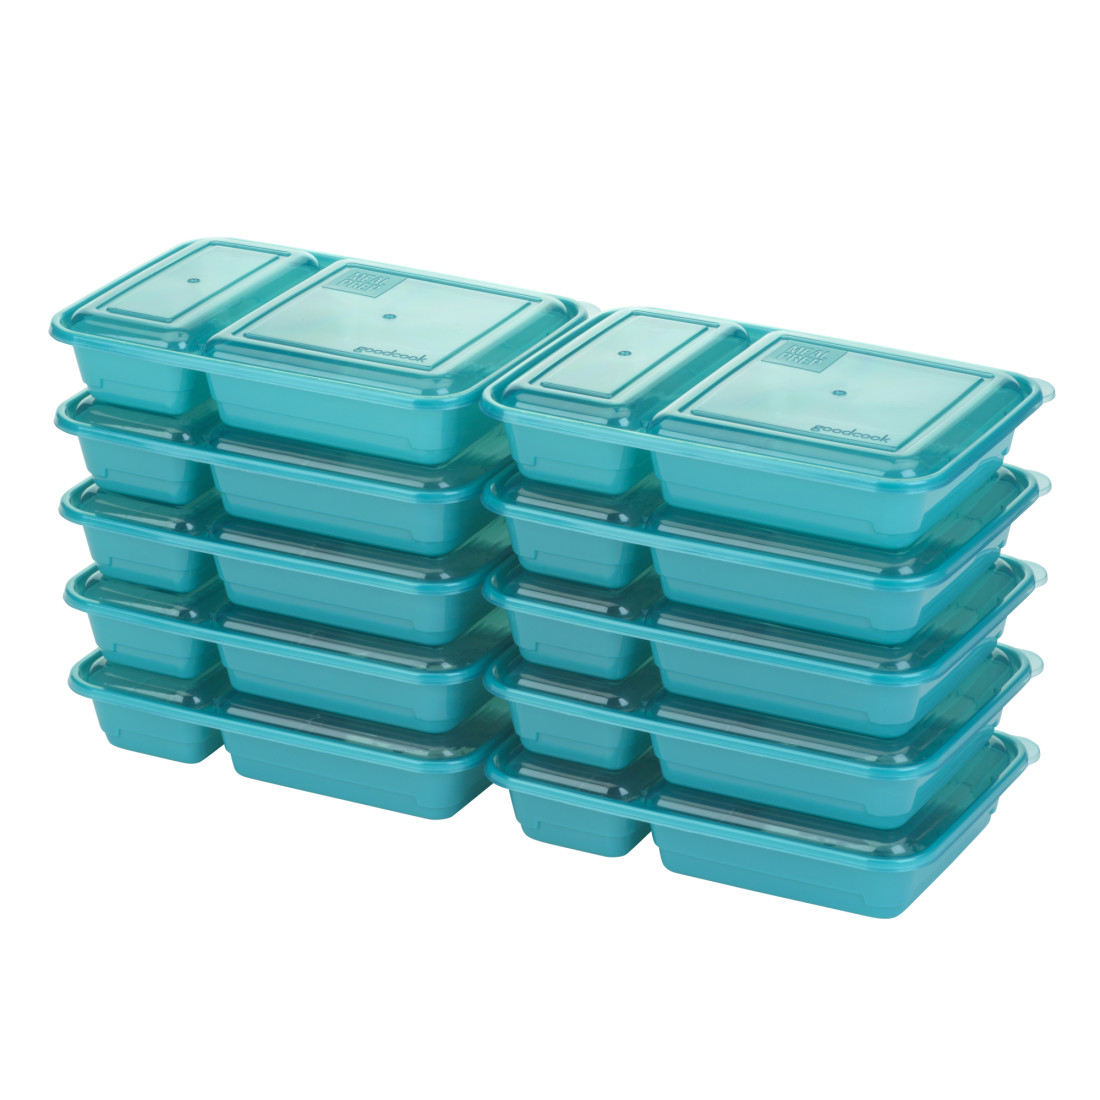 Bulk Sure Fresh Mini Storage Containers with Lids, 10-ct. Packs at